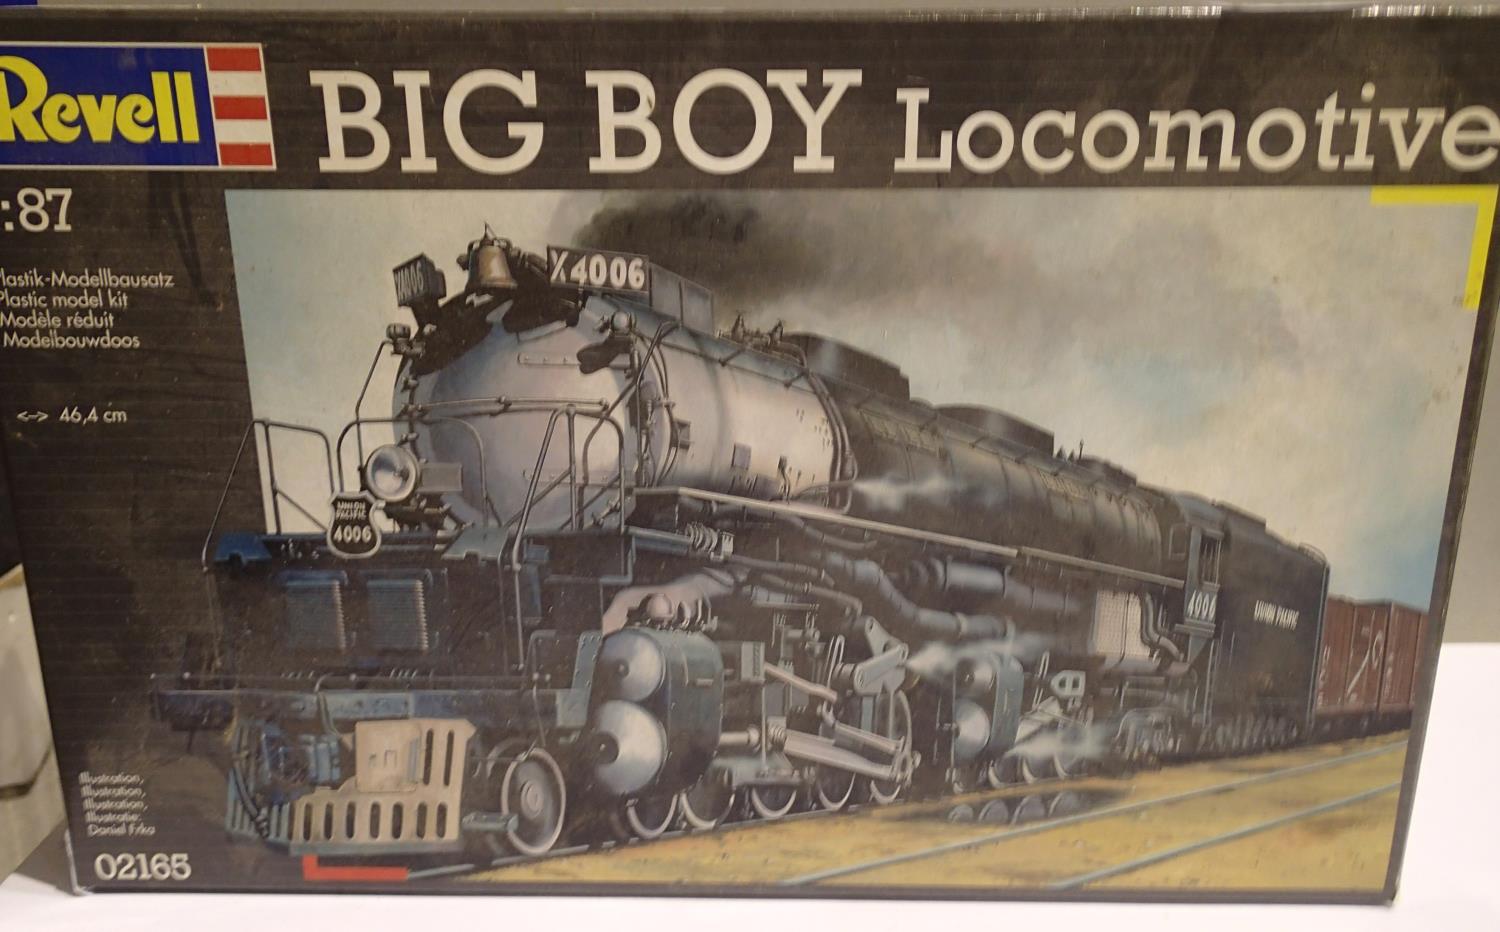 Revell Big Boy locomotive factory sealed model railway engine. Not available for in-house P&P,